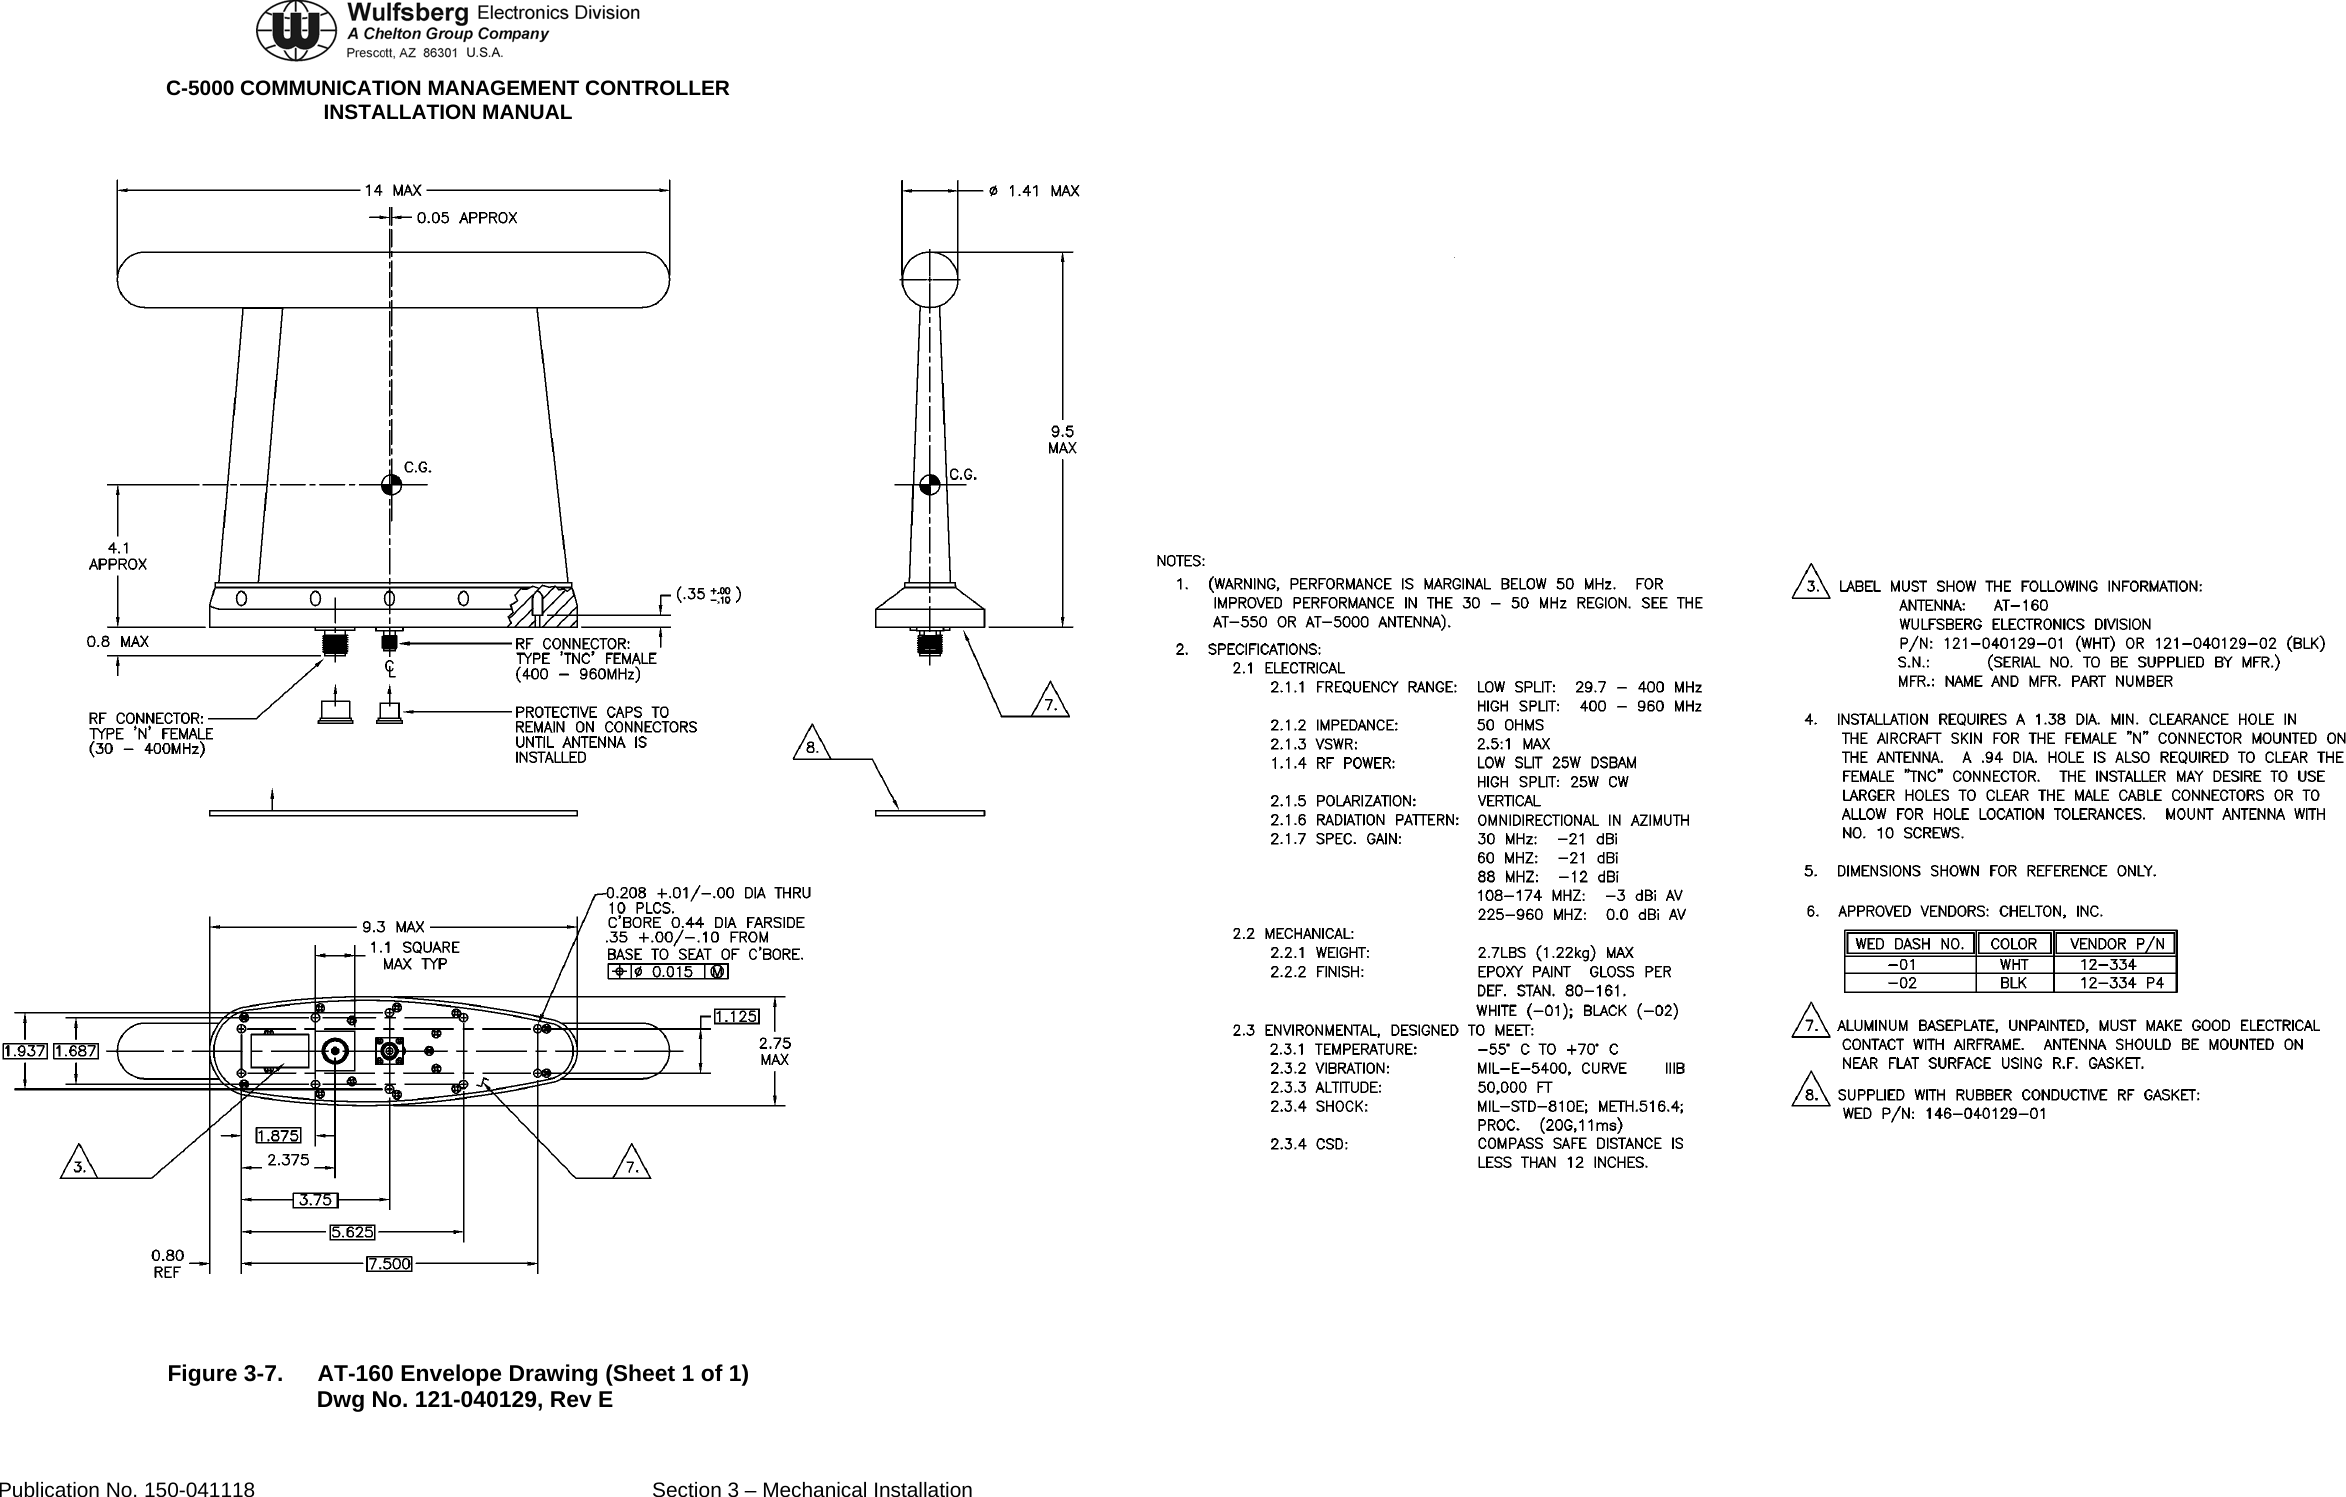  C-5000 COMMUNICATION MANAGEMENT CONTROLLER INSTALLATION MANUAL  Figure 3-7.  AT-160 Envelope Drawing (Sheet 1 of 1) Dwg No. 121-040129, Rev E Publication No. 150-041118  Section 3 – Mechanical Installation 